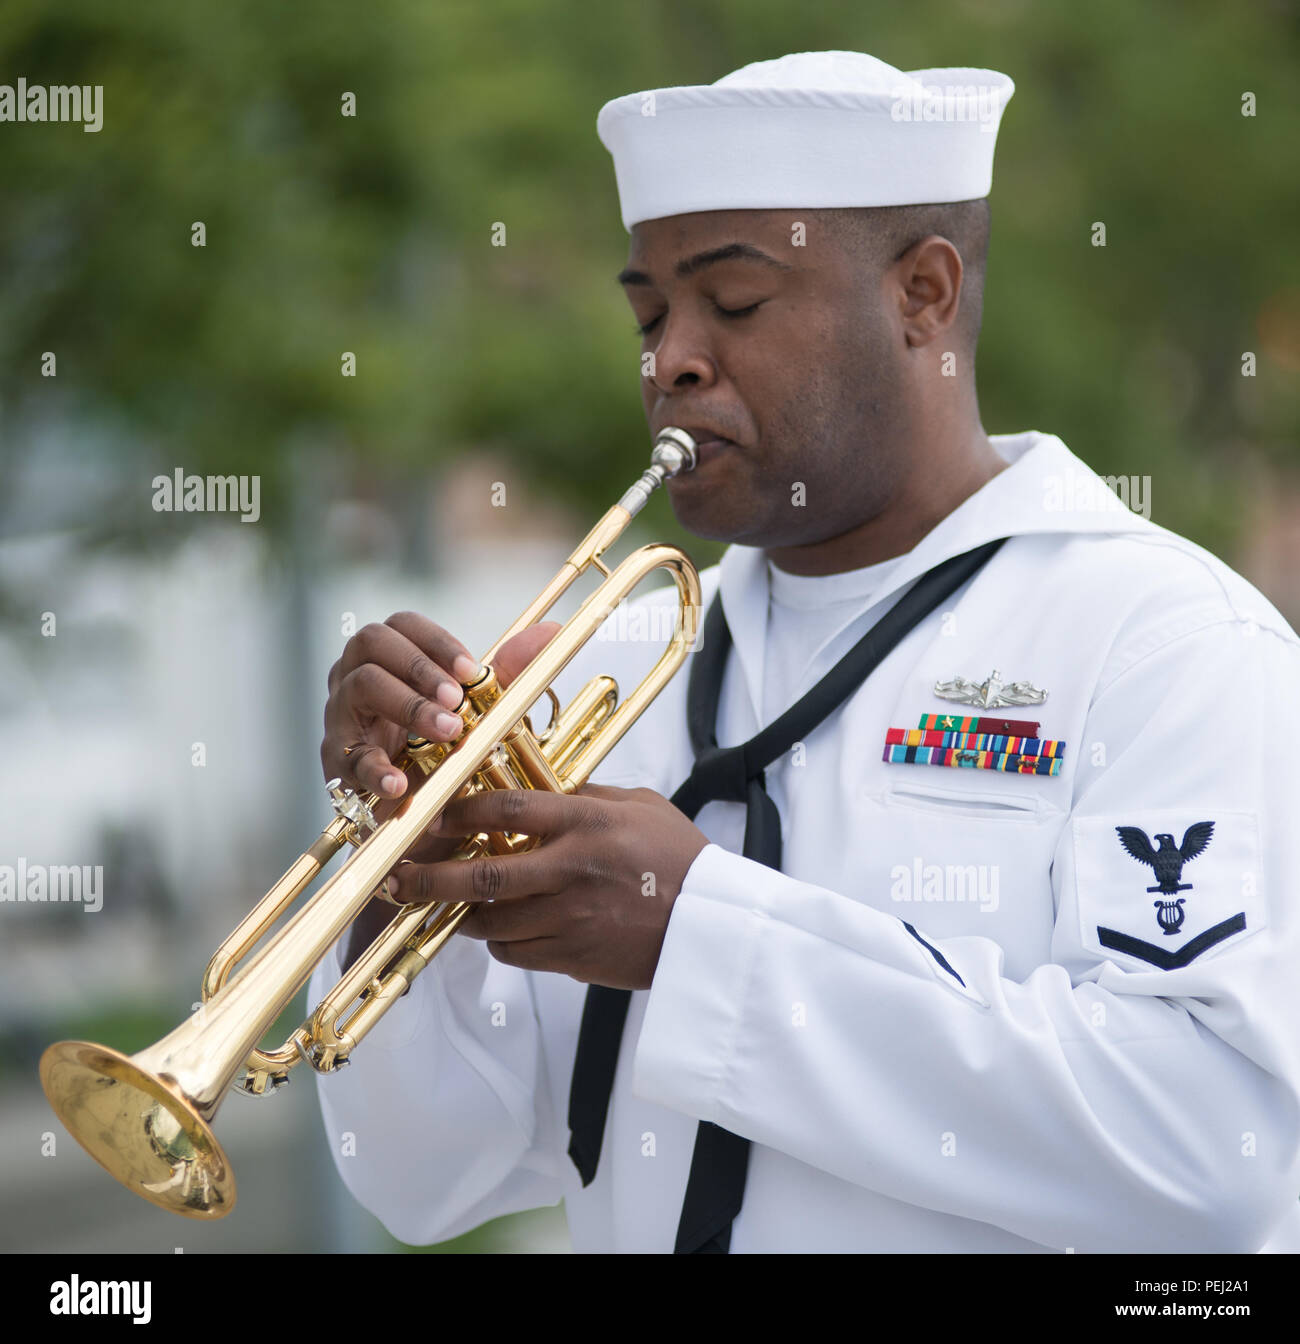 150826-N-CI175-095 DETROIT, Mich. (Aug. 26, 2015) Musician 3rd Class (SW) Michael Bookman, assigned to the Navy Band Great Lakes Brass Band, plays in a concert along Detroit’s downtown RiverWalk as part of Detroit Navy Week. Navy Weeks focus a variety of assets, equipment and personnel on a single city for a week-long series of engagements designed to bring America's Navy closer to the people it protects, in cities that don't have a large naval presence. (U.S. Navy photo by Mass Communication Specialist 1st Class Jon Rasmussen/Released) Stock Photo